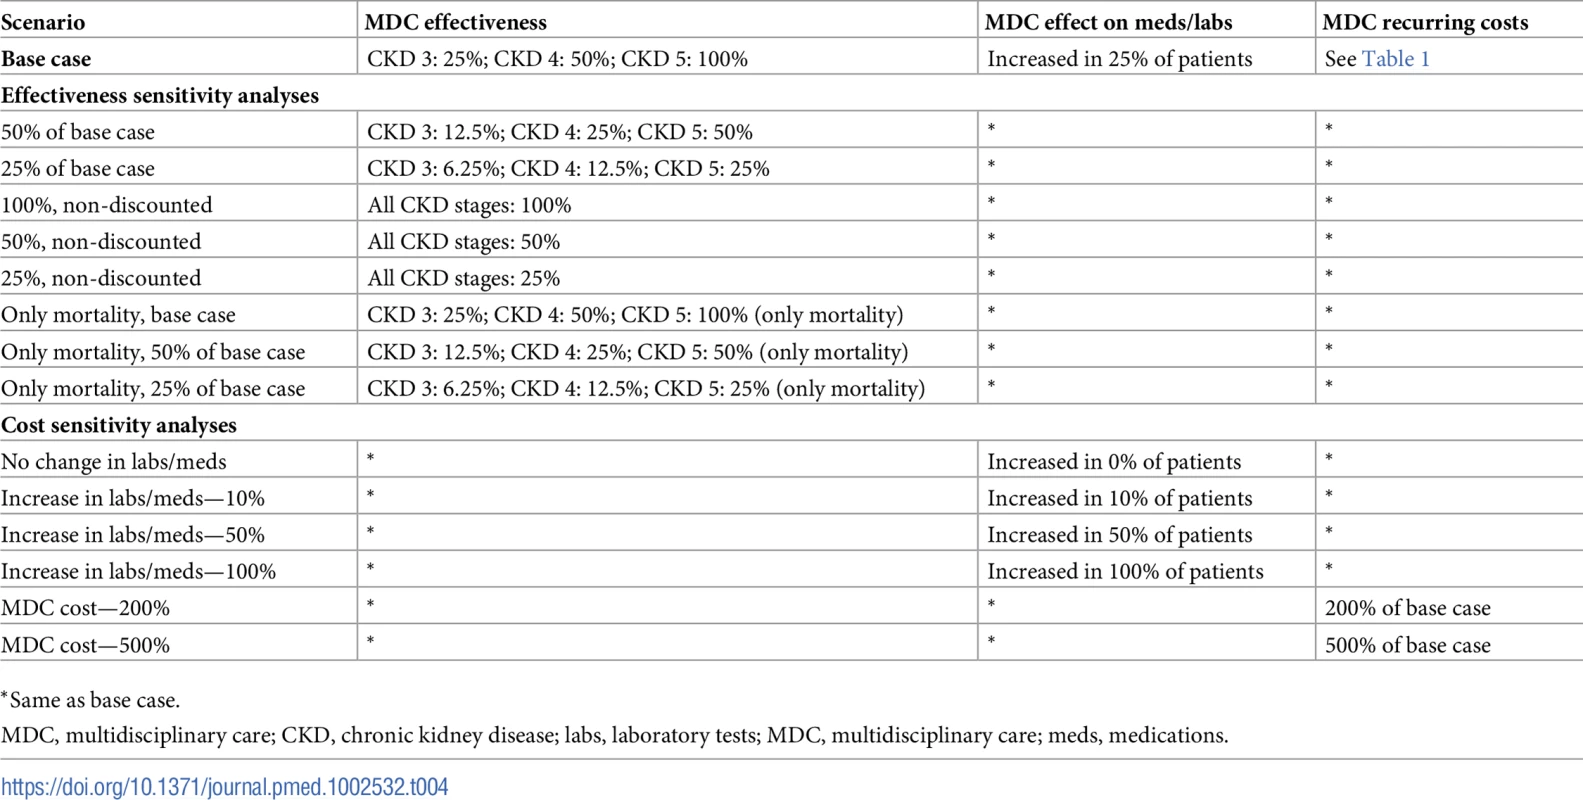 Sensitivity analyses: Varying the effectiveness and cost of MDC.